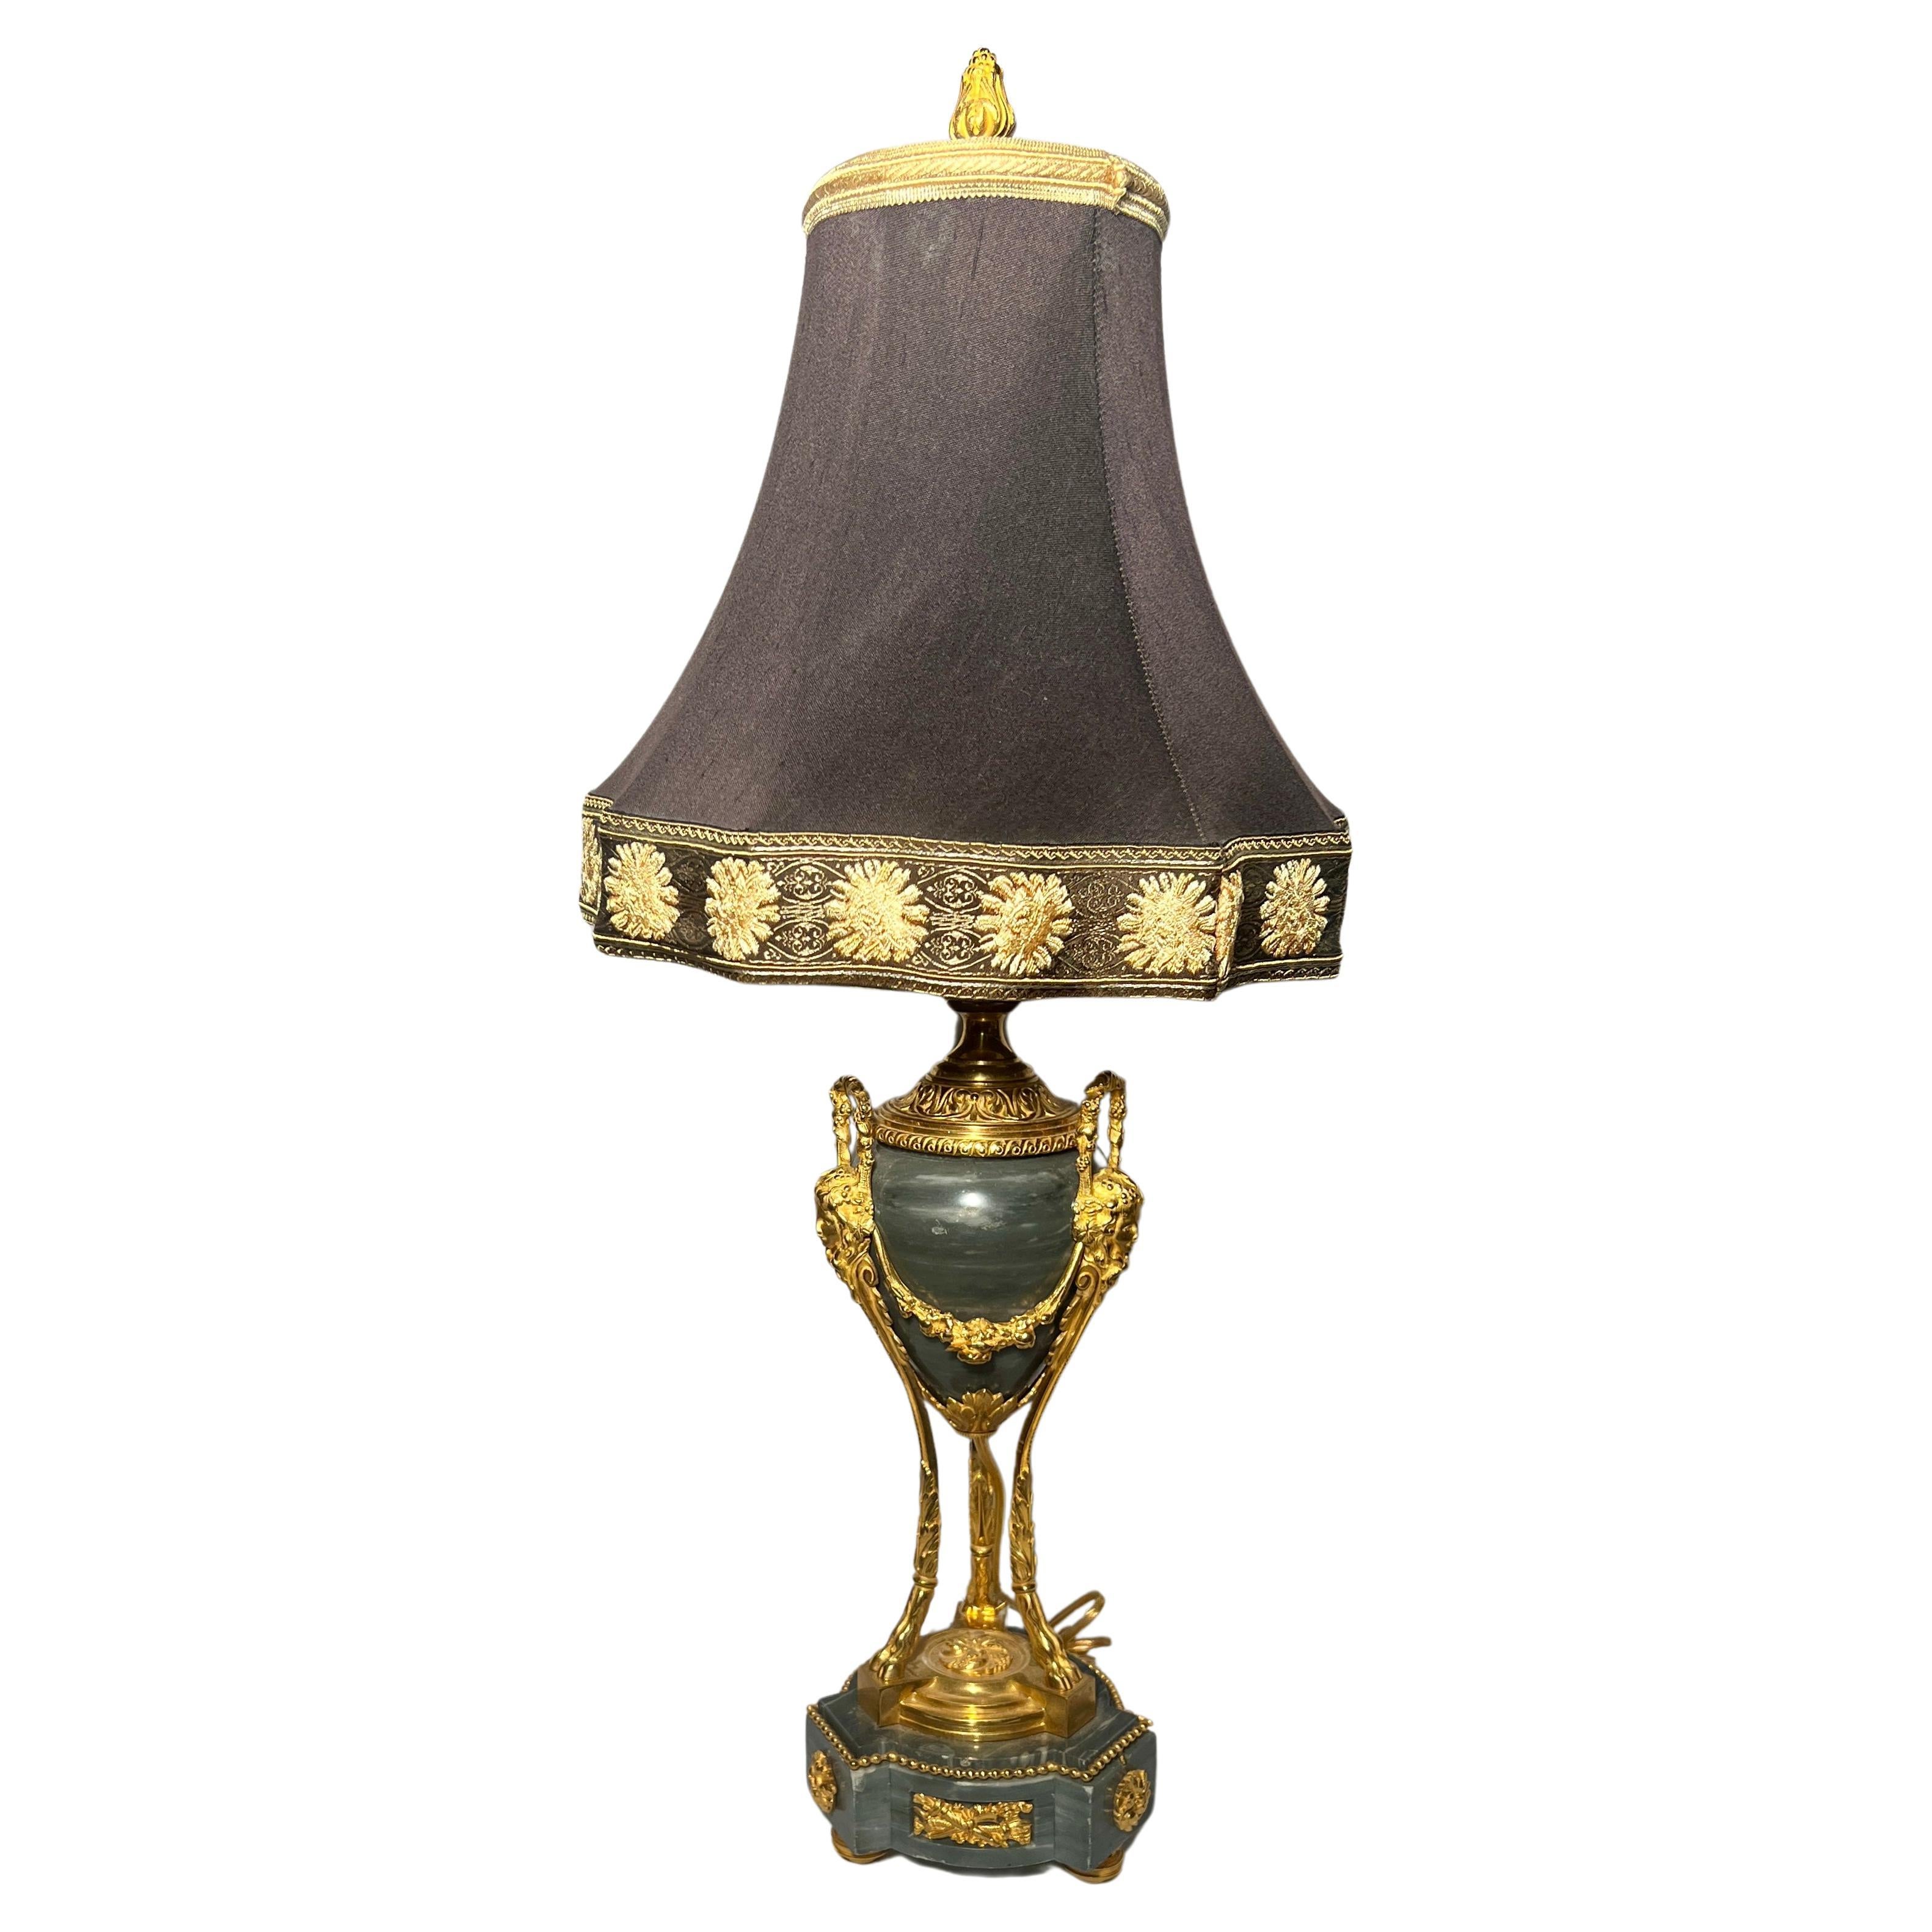 Antique French Louis XVI Ormulu and Green Marble Lamp, Circa 1875-1885.
Bespoke Shade 12